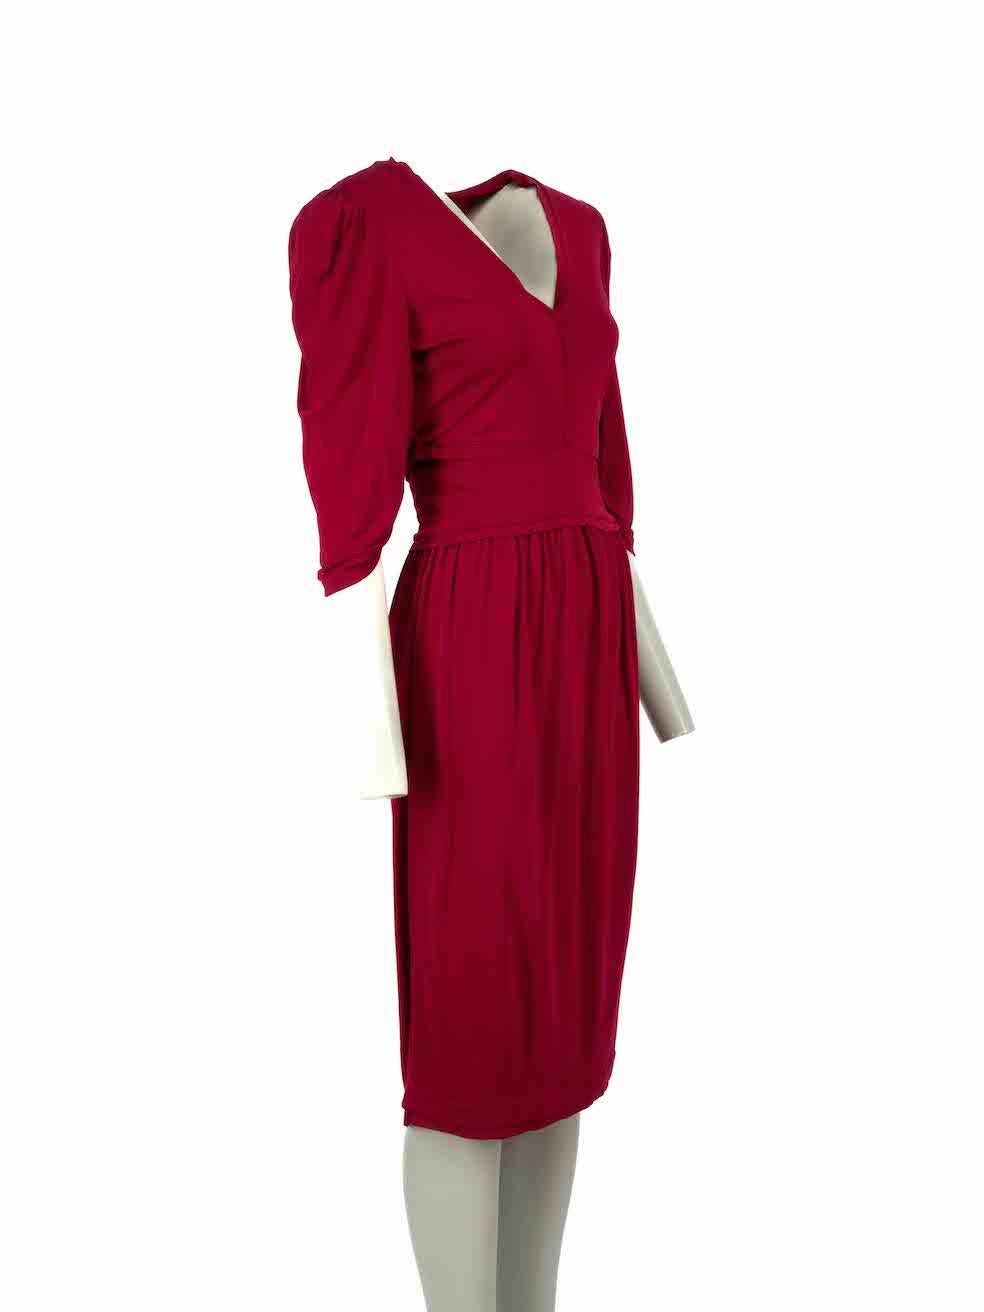 CONDITION is Never worn, with tags. No visible wear to dress is evident on this new Fendi designer resale item.
 
Details
Burgundy
Synthetic
Midi dress
Stretchy
V neckline
Ruched mid sleeves
Side zip closure

Made in Italy
 
Composition
85% Rayon